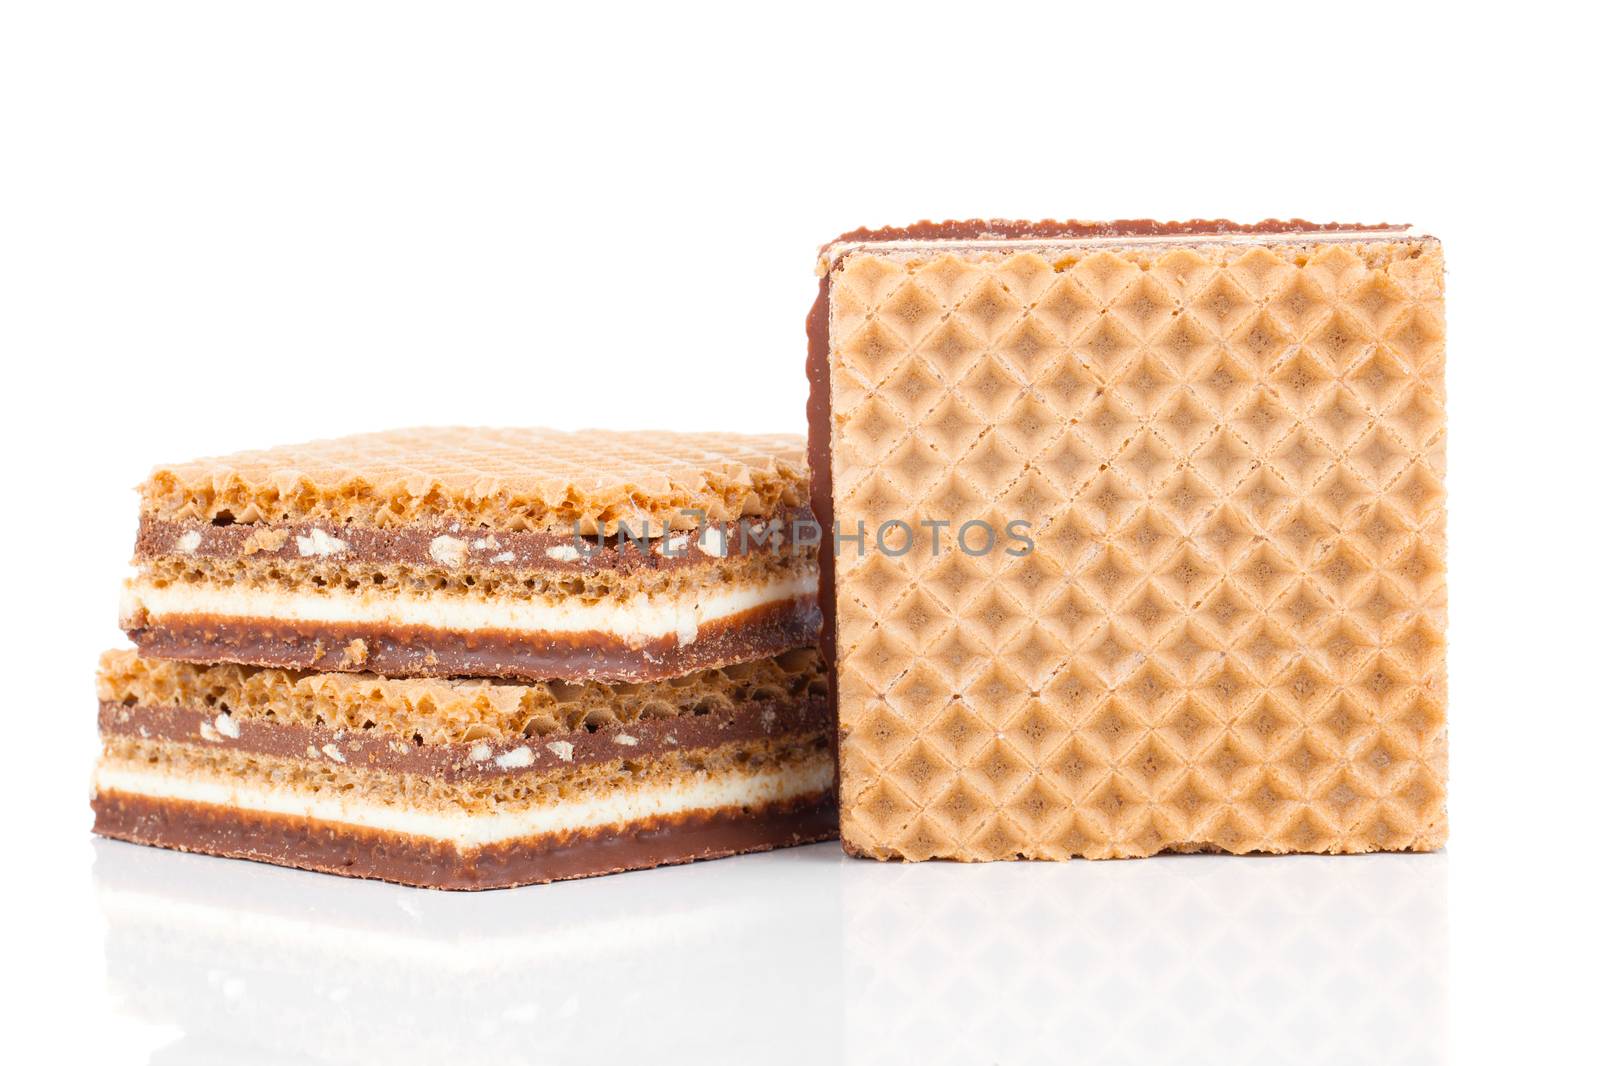 Wafers with chocolate on a white background by motorolka